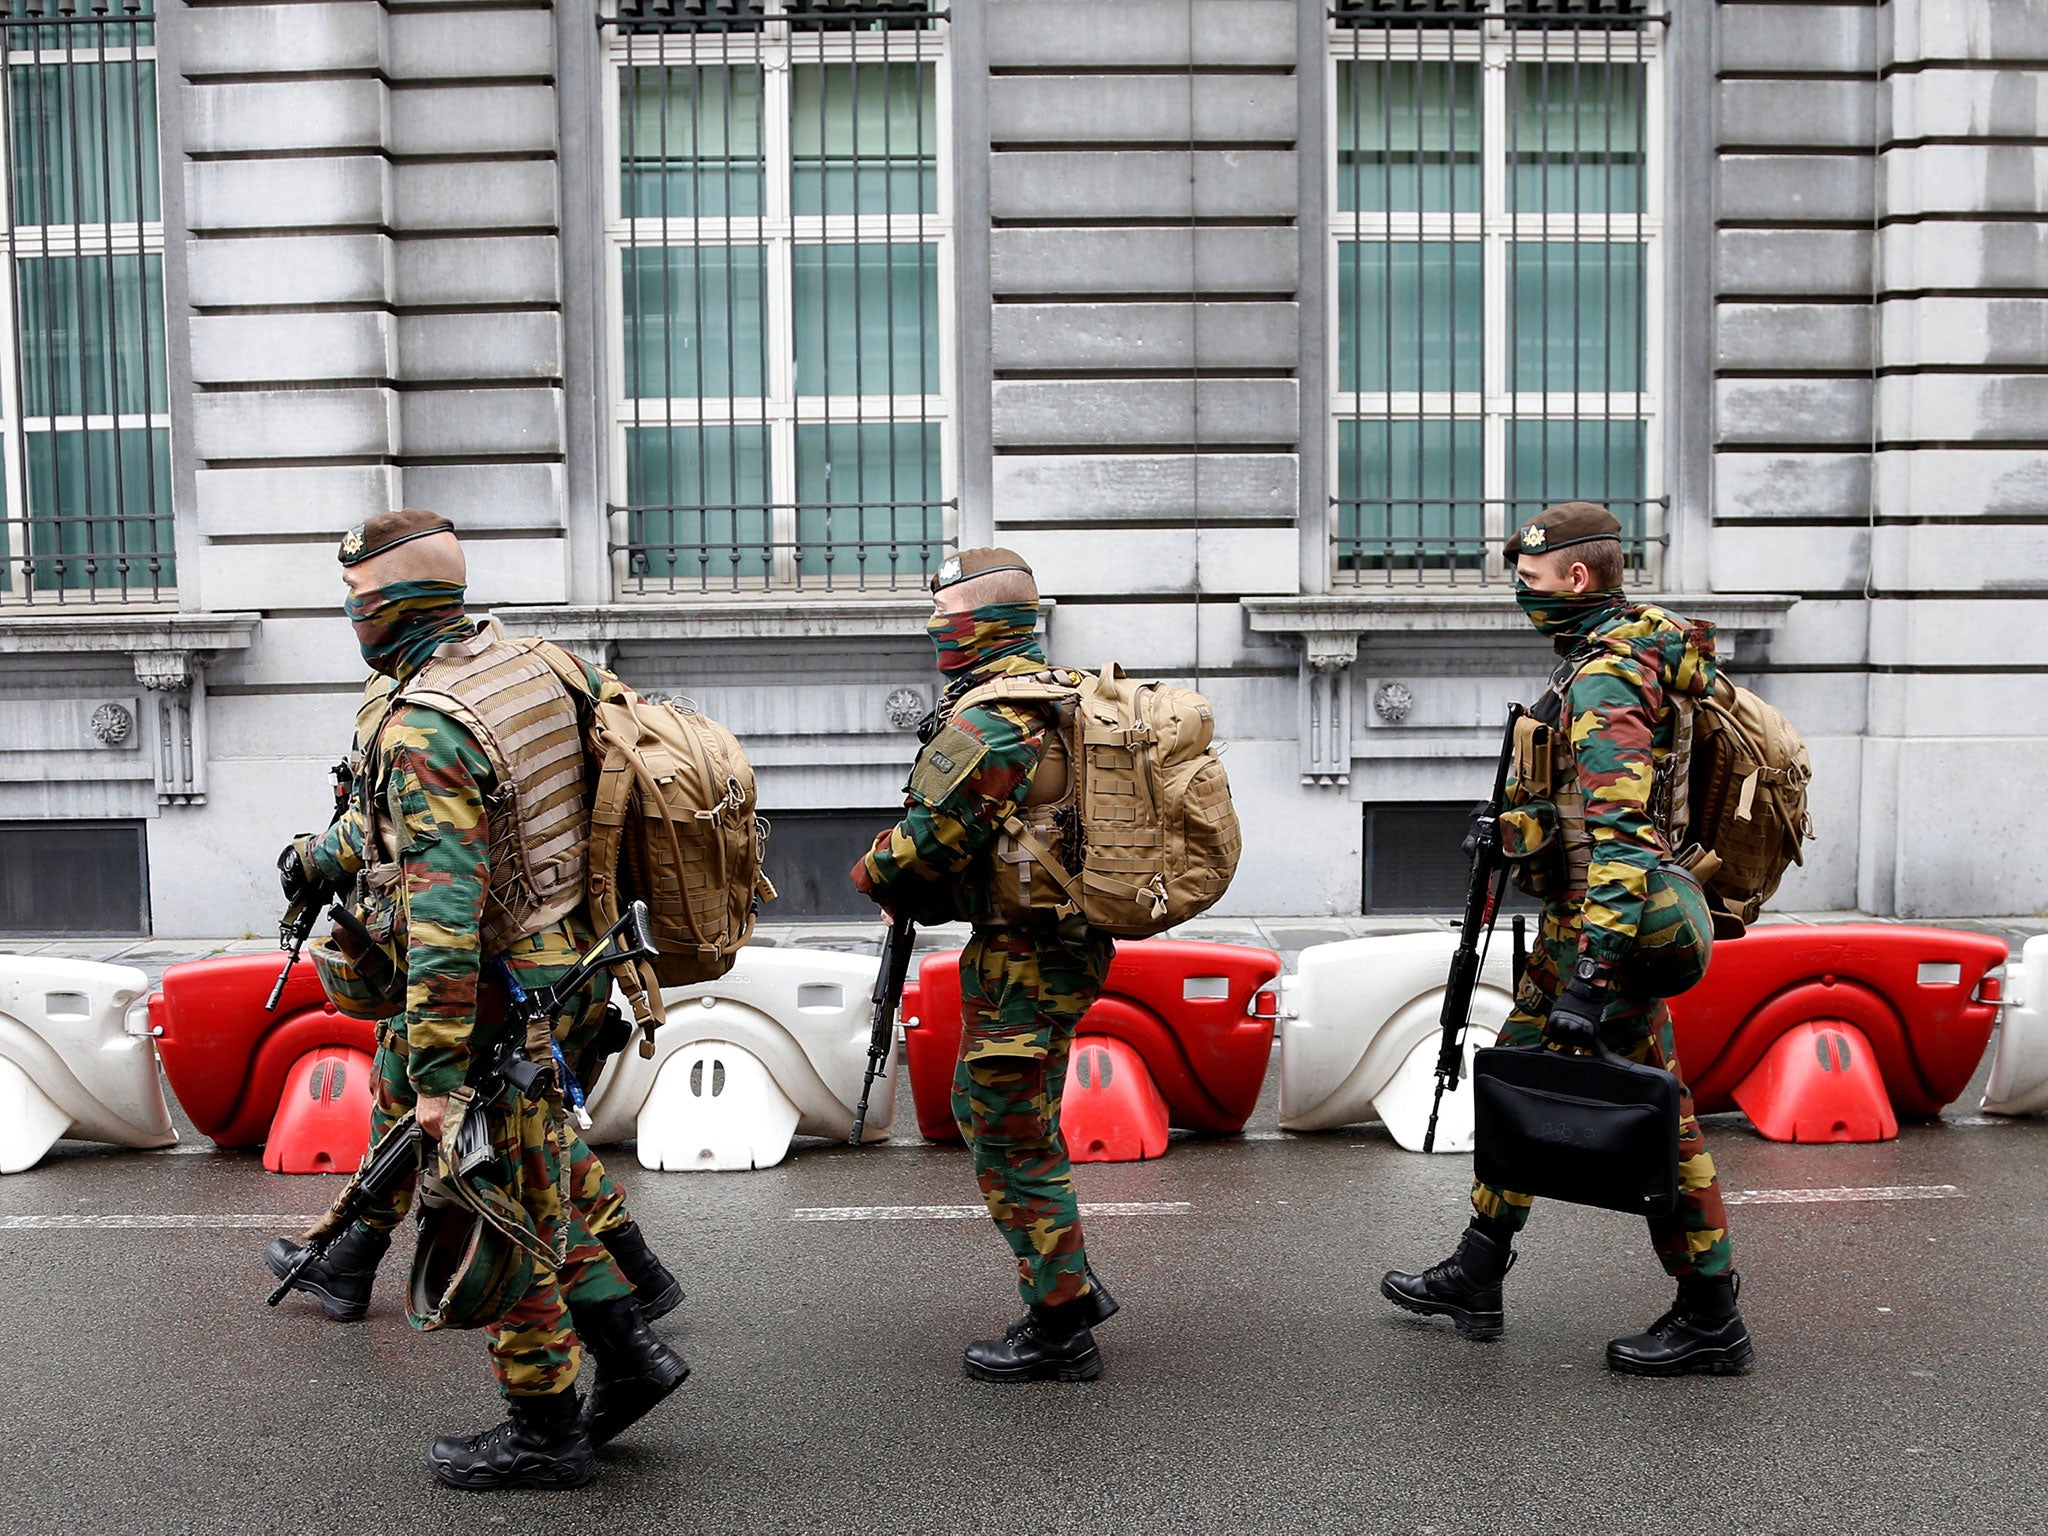 Forty houses were among properties searched in raids across Belgium